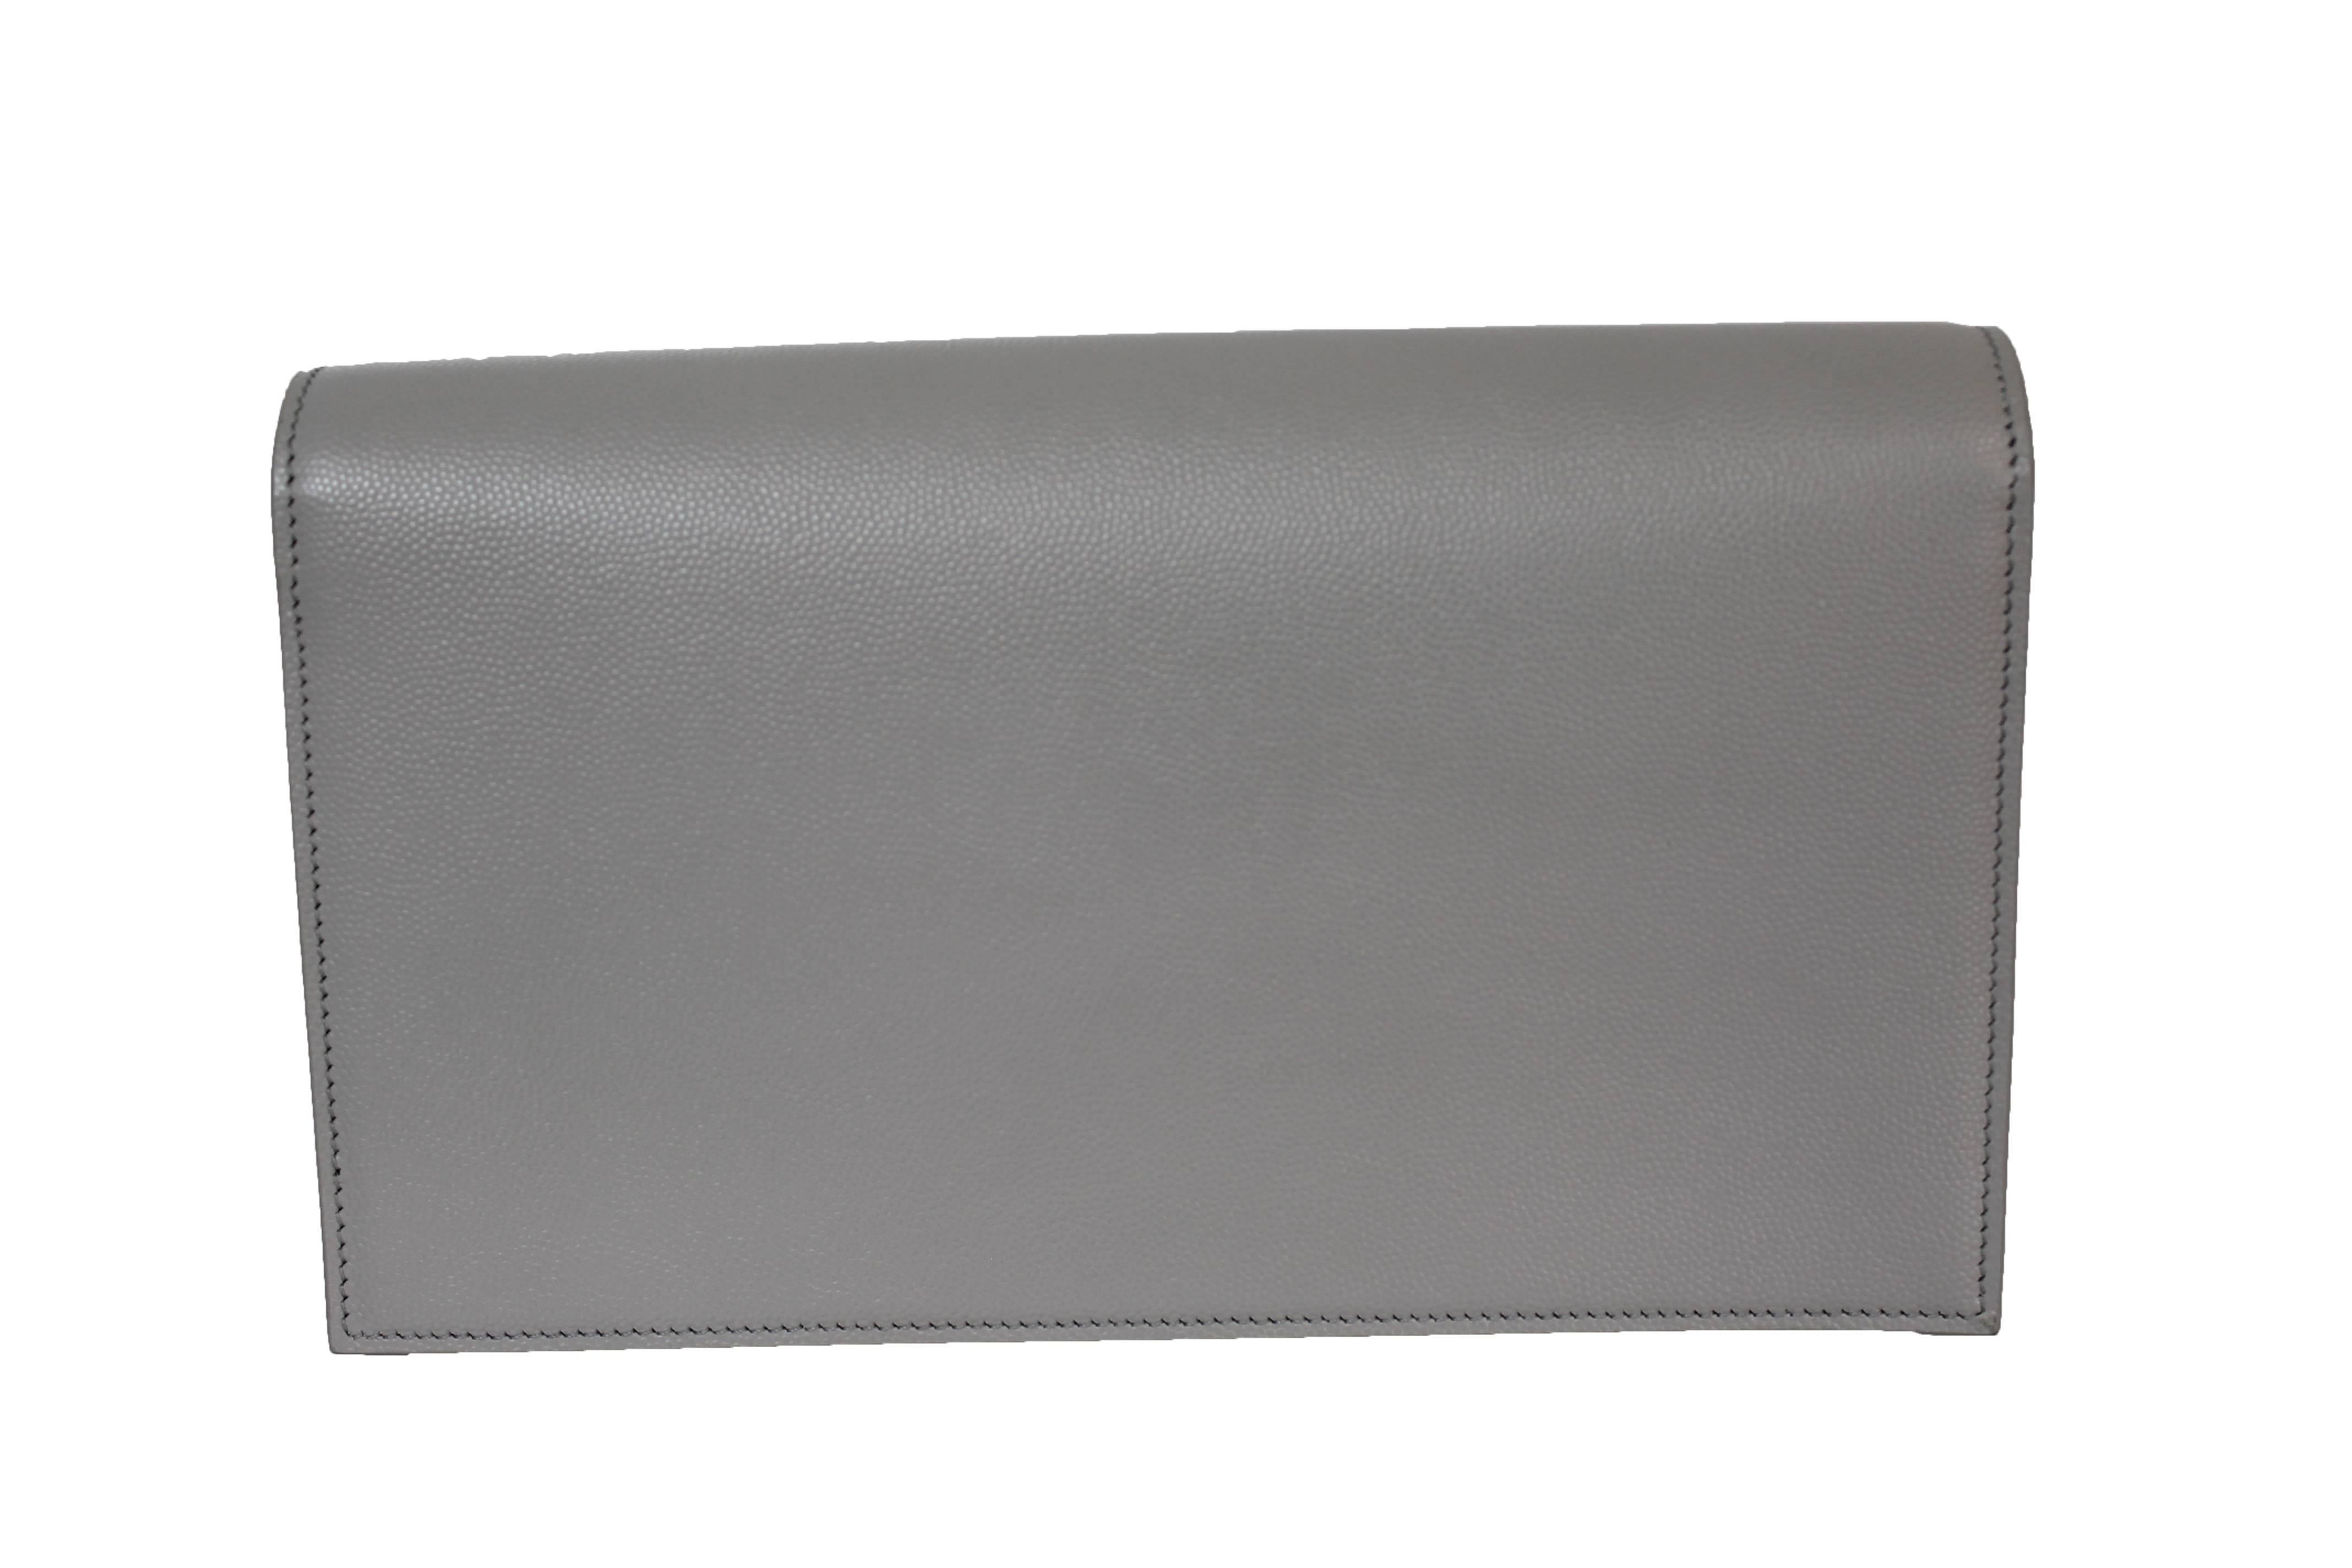 Item is new without tags.

A gleaming silvertone insignia polishes the front of a svelte, grained calfskin clutch that represents the epitome of fashionable elegance.

Magnetic snap-flap closure.
Interior wall pocket.
Leather.
By Saint